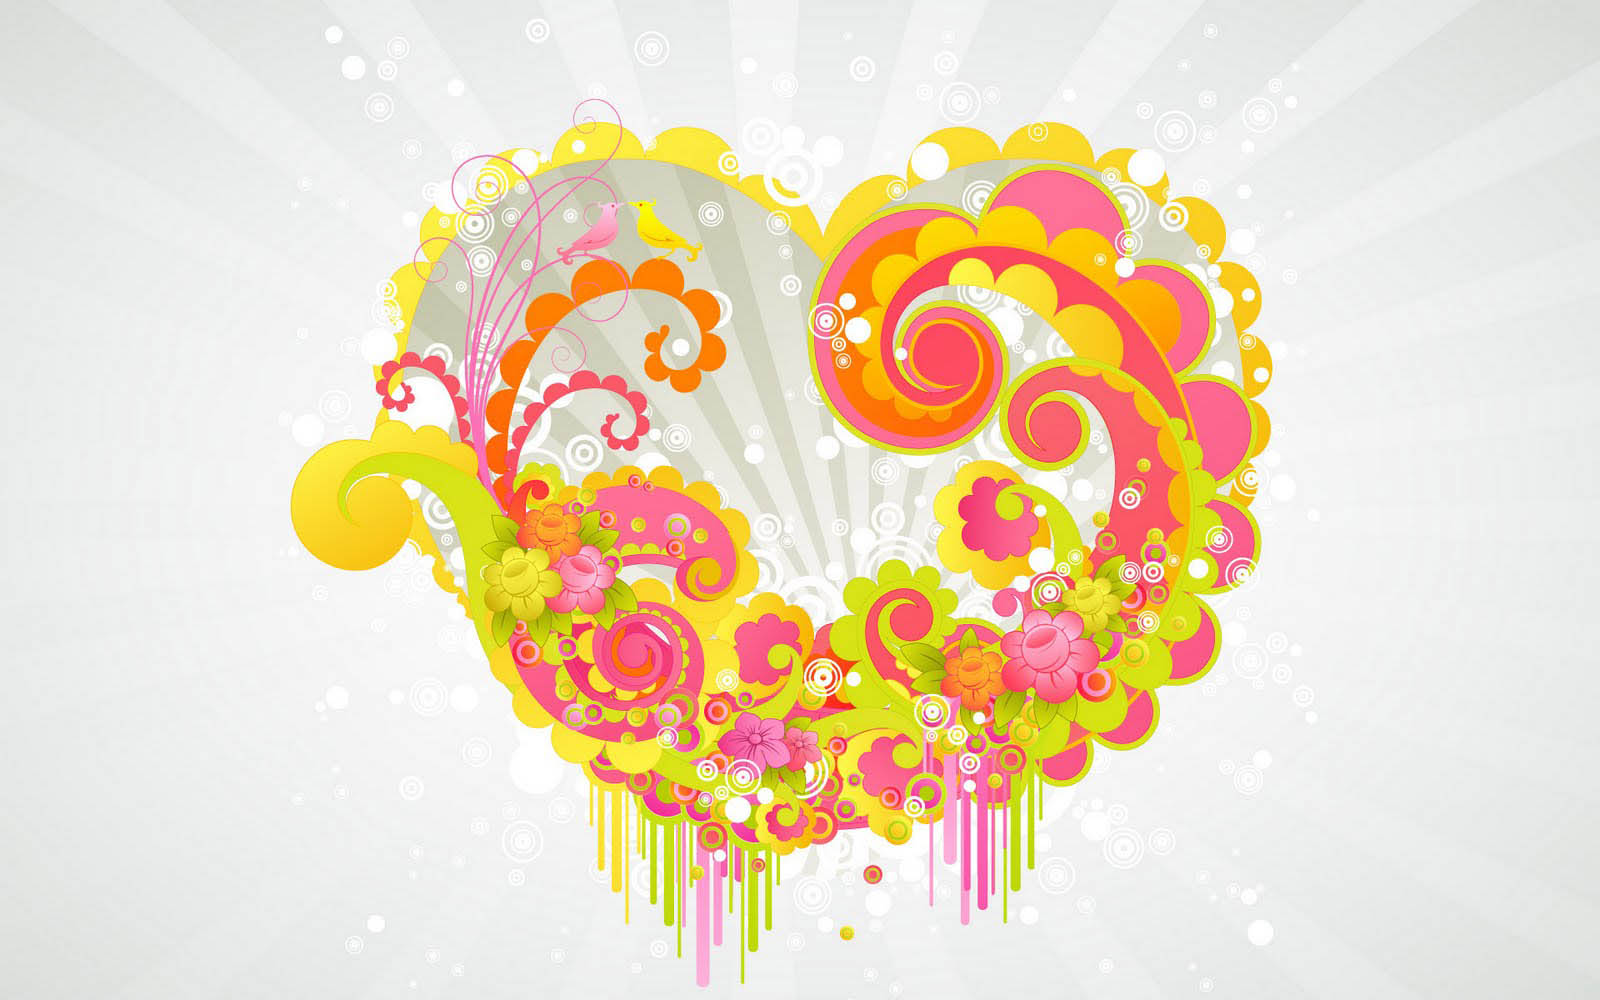  wallpapers  Love  Hearts  Wallpapers 